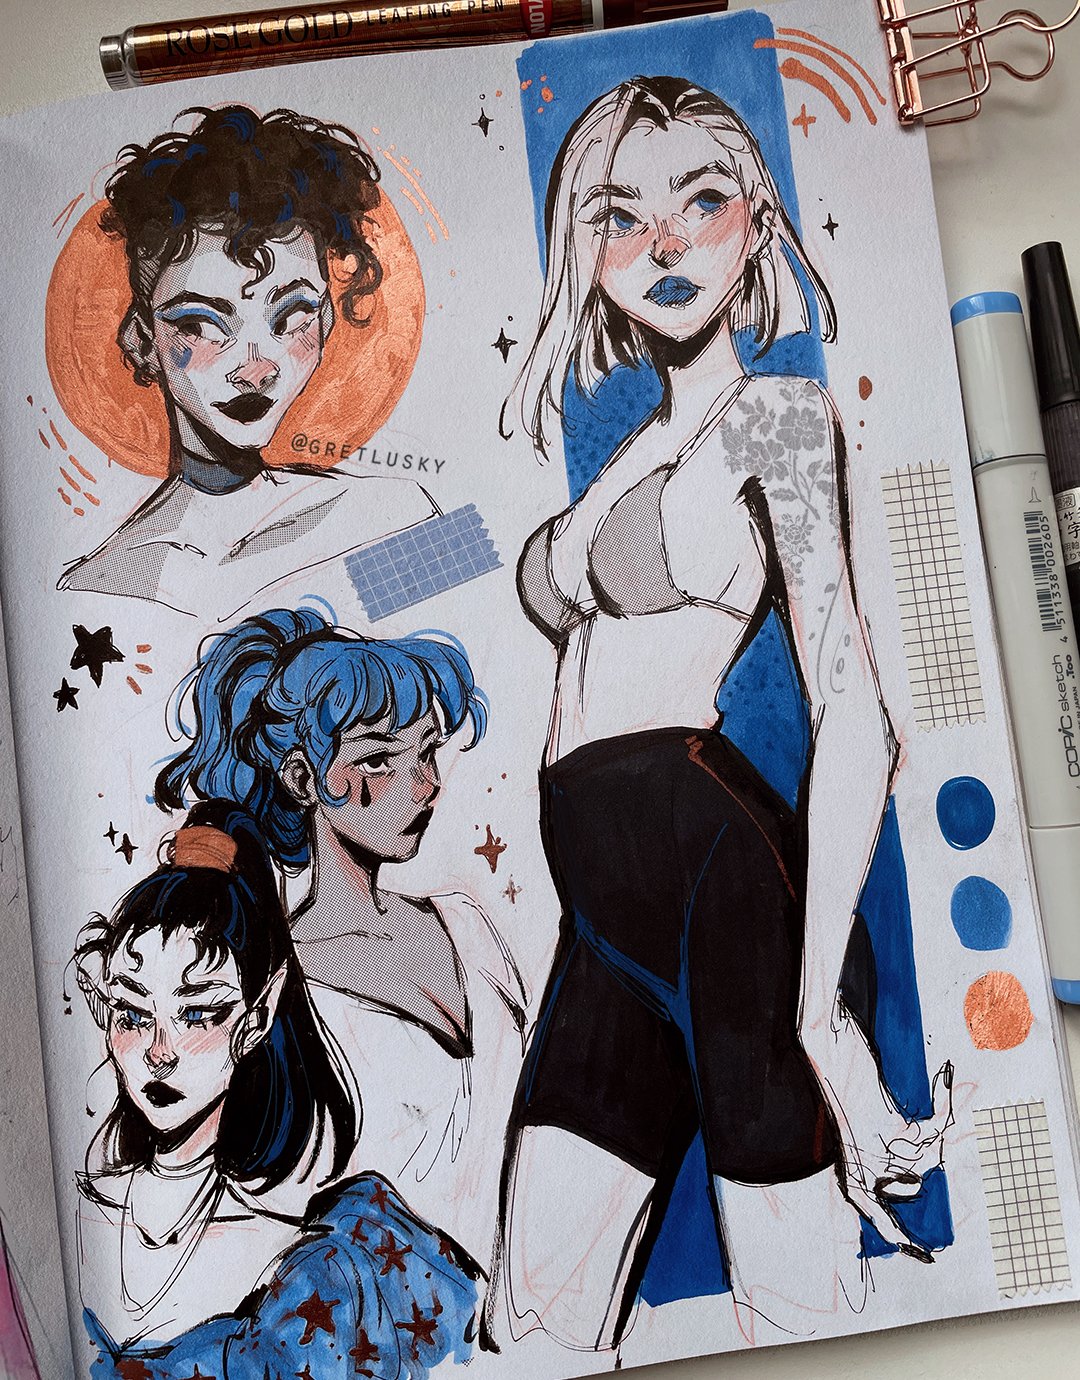 Gretel Lusky's Instagram post: “A sketchbook page I created using  @spectrumnoir alcohol markers and fineliners ✨ I abso…